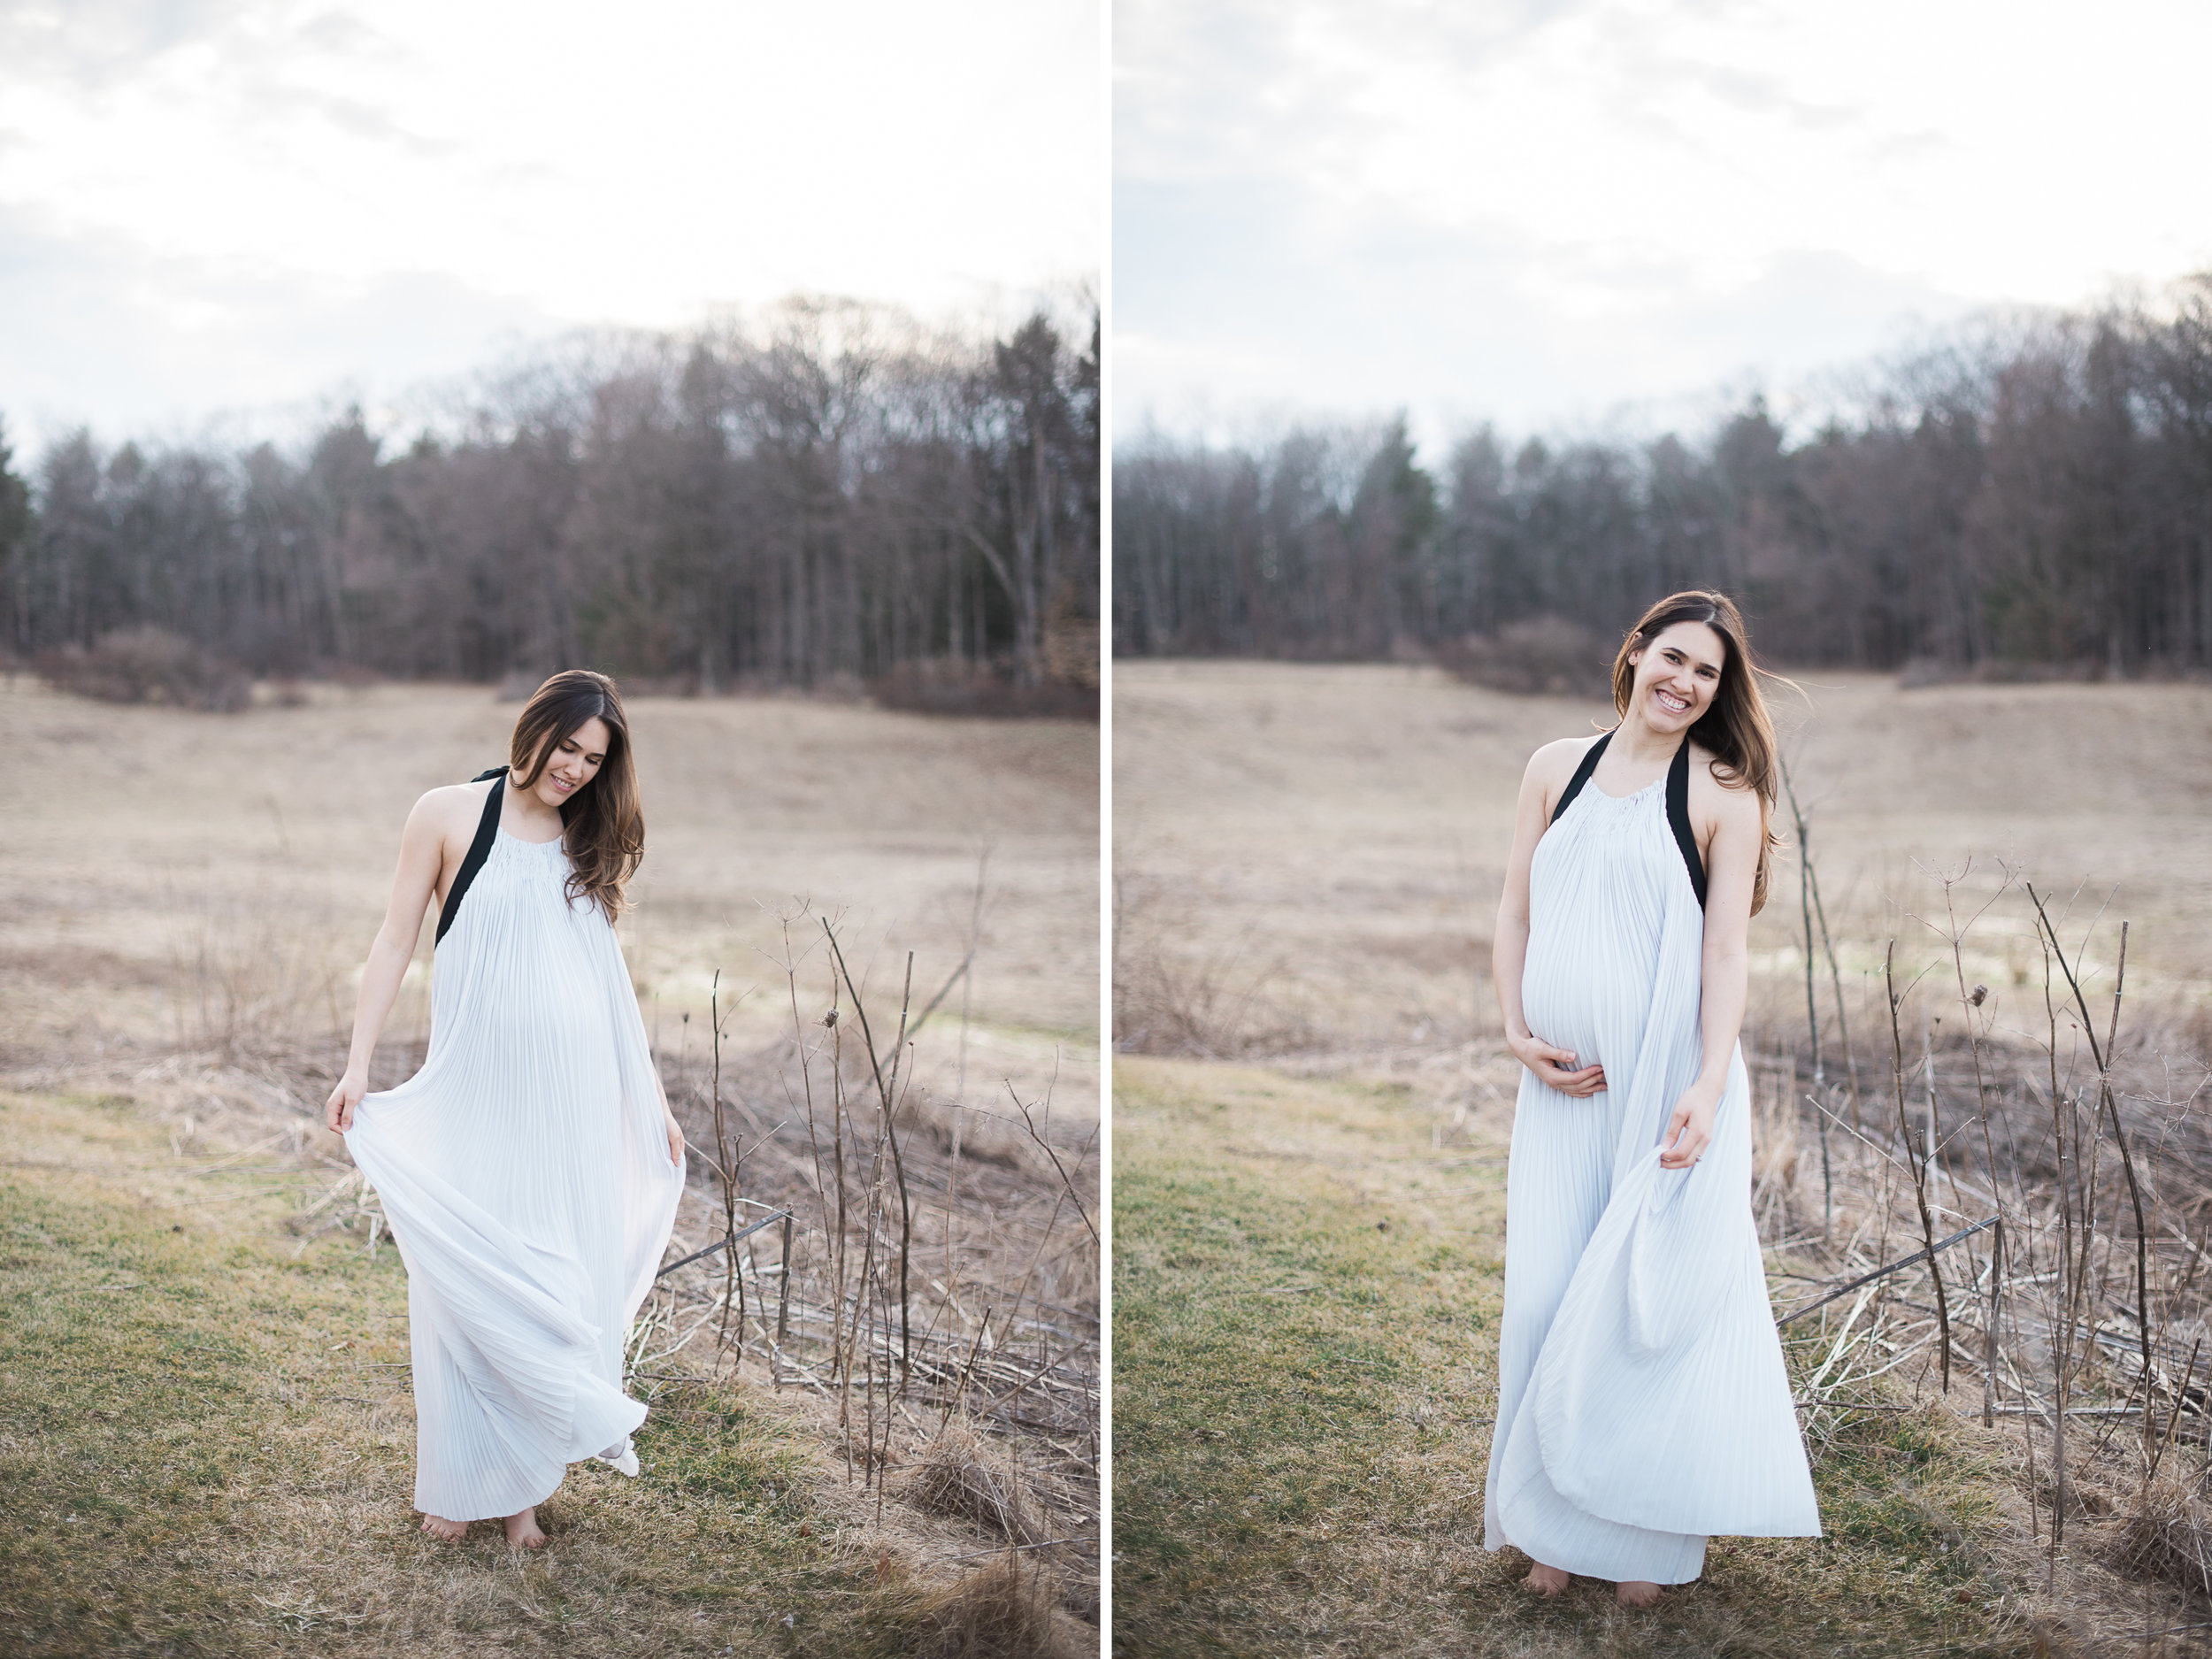 Lifestyle Maternity Portraits in Western MA